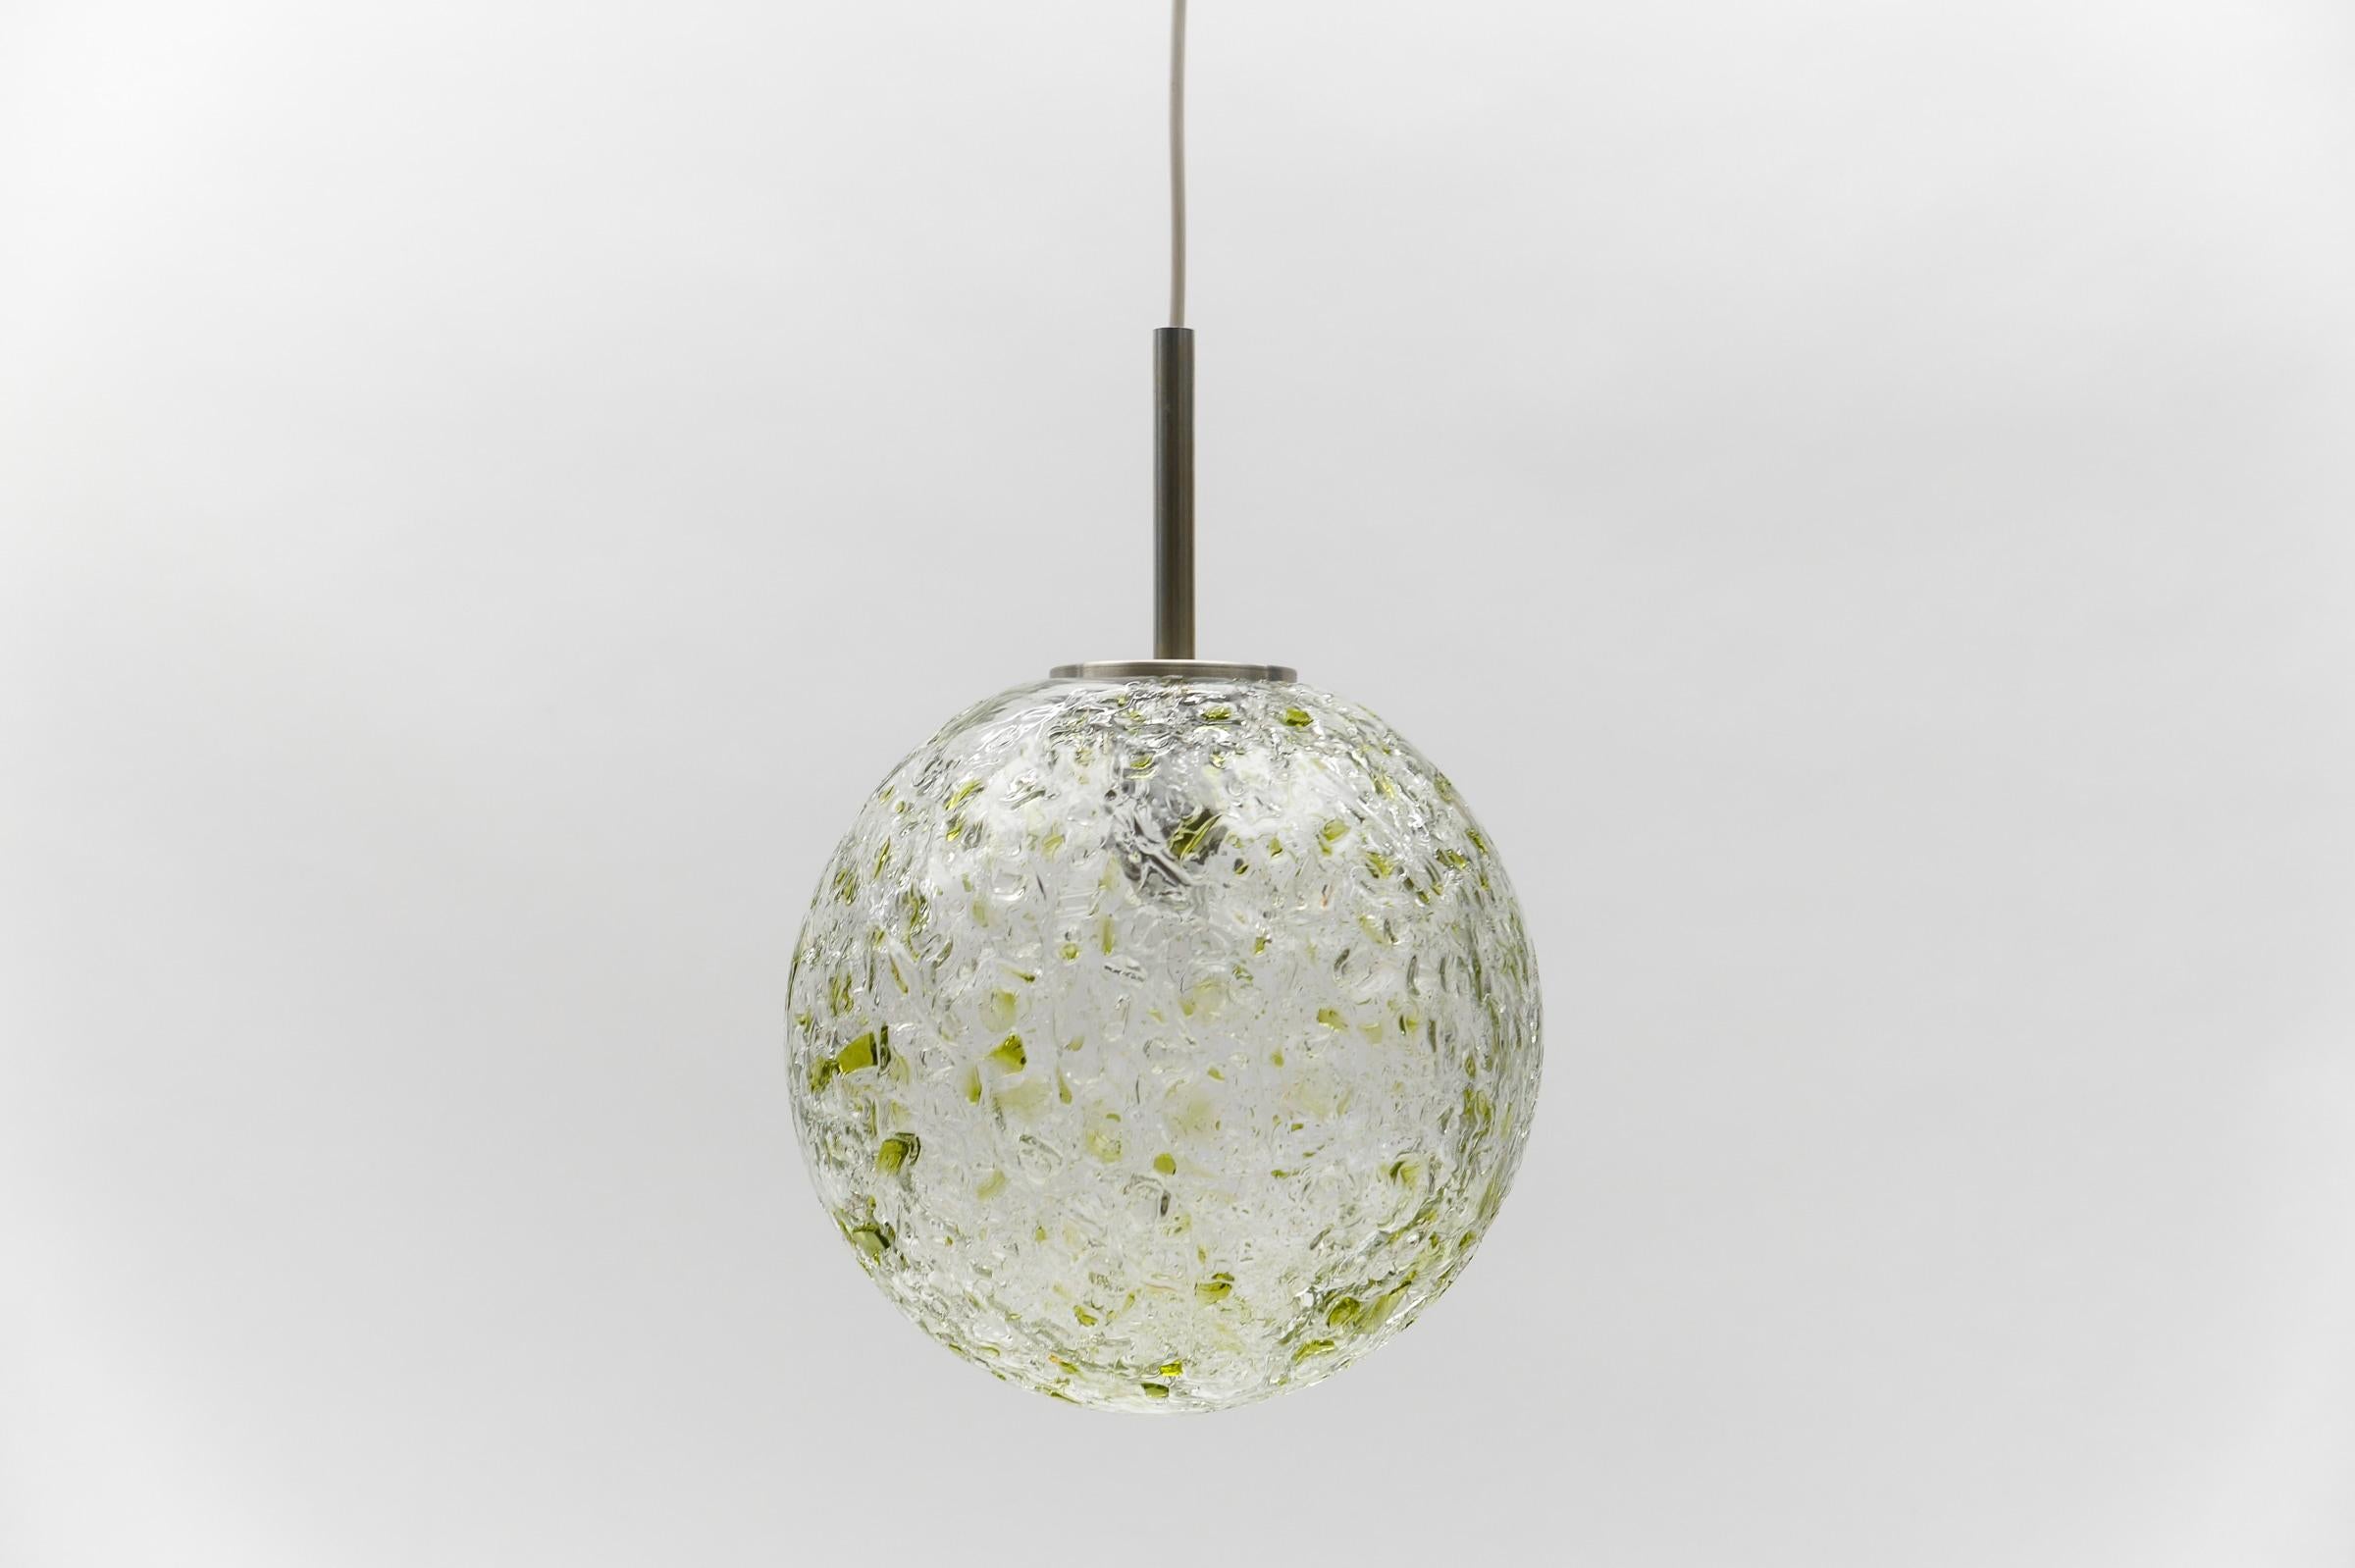 Green Massive Glass Ball Pendant Lamp by Doria, 1960s Germany In Good Condition For Sale In Nürnberg, Bayern